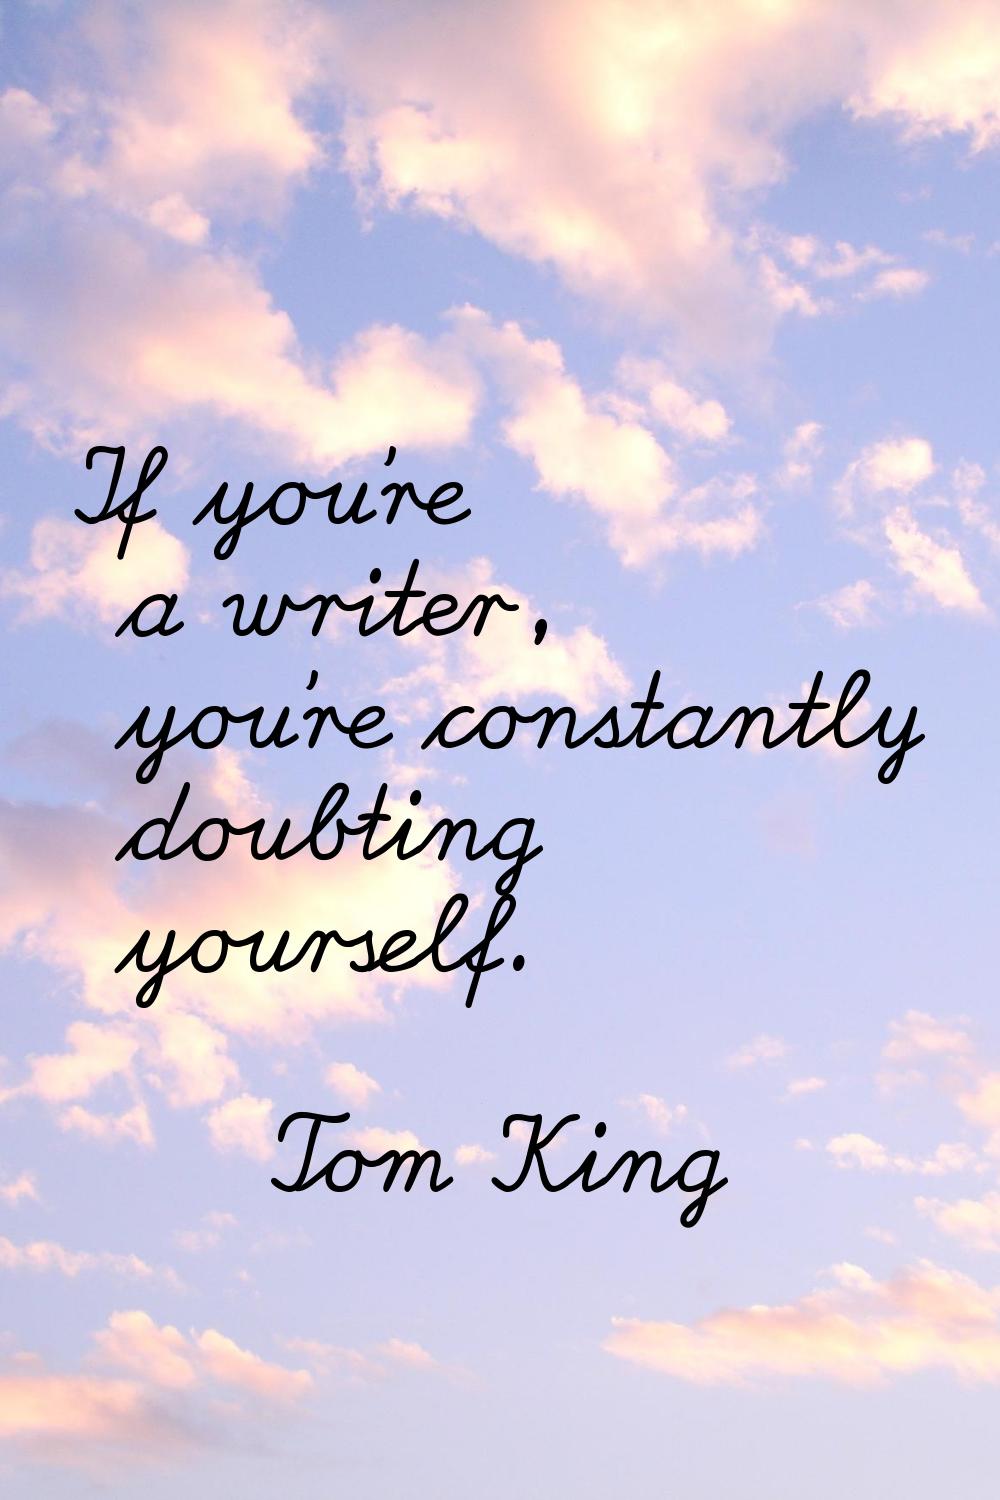 If you're a writer, you're constantly doubting yourself.